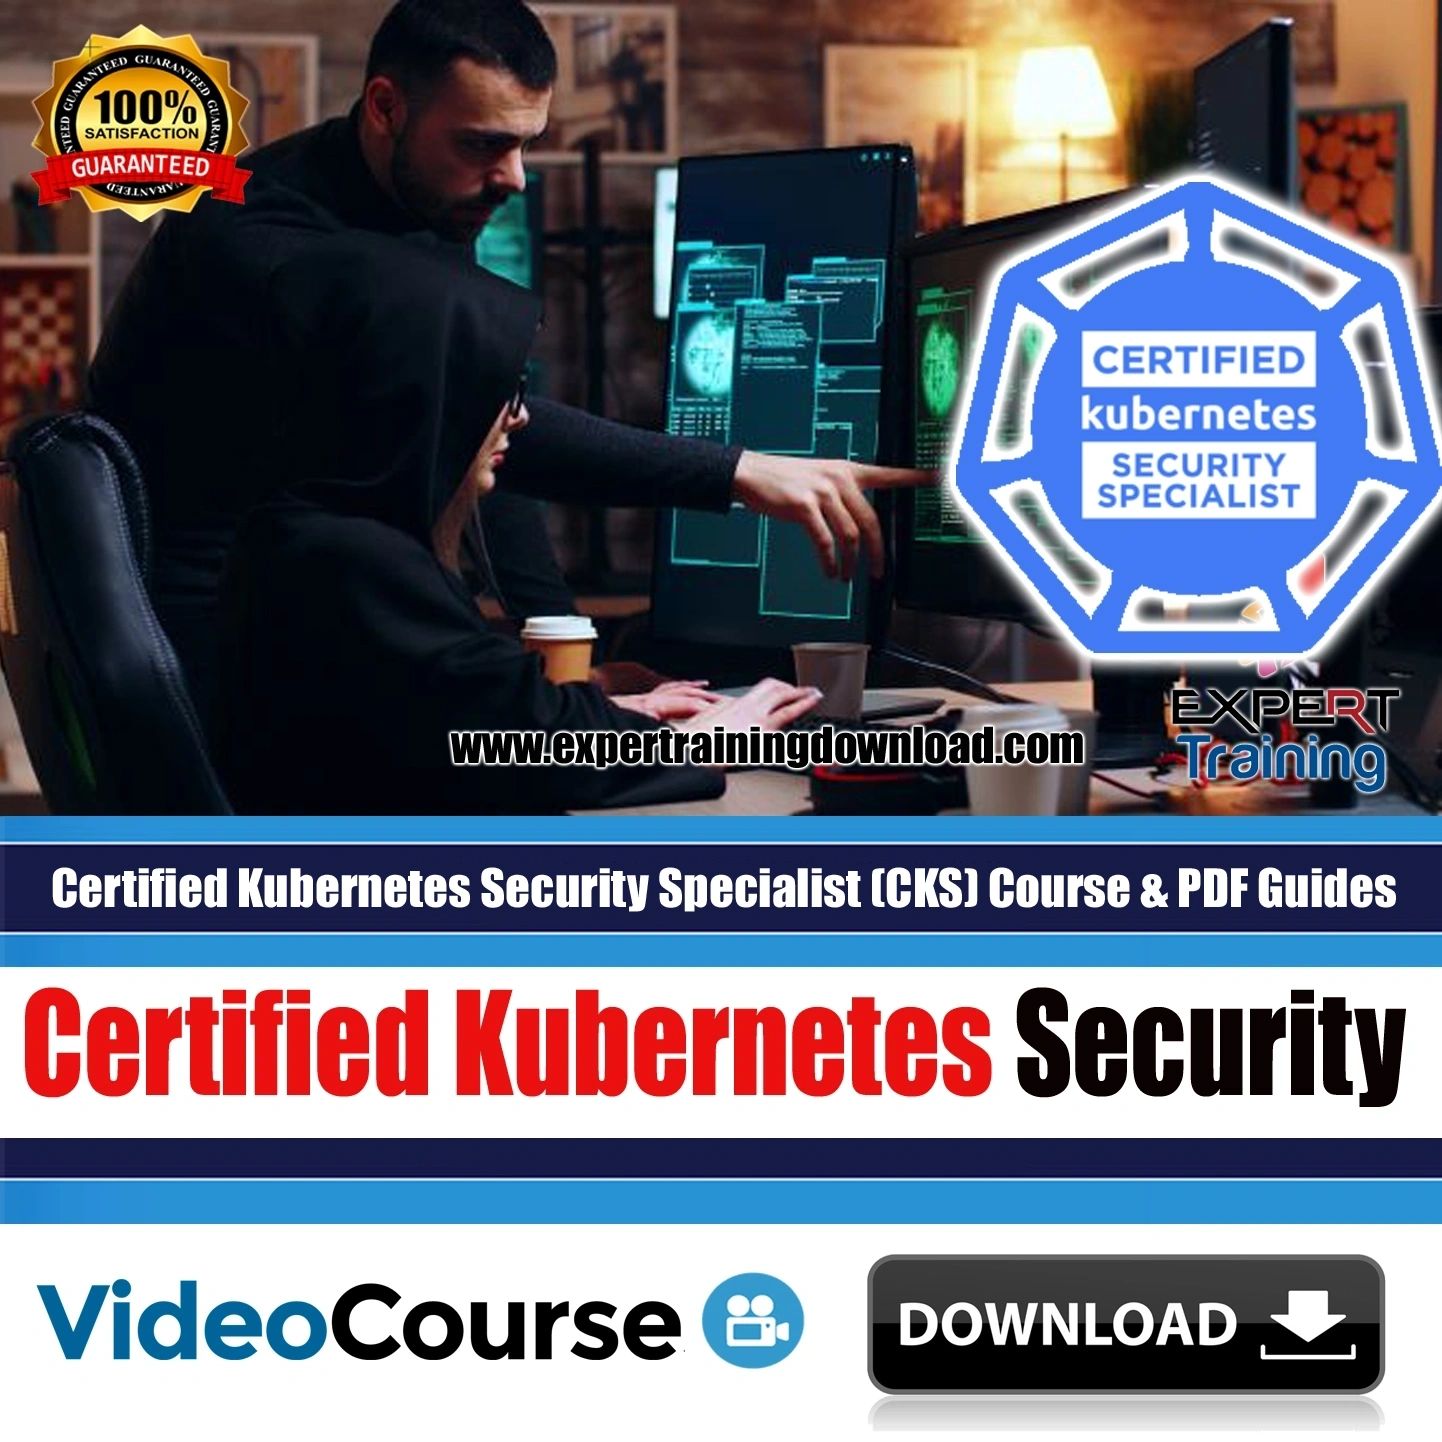 Certified Kubernetes Security Specialist (CKS) Course & PDF Guides